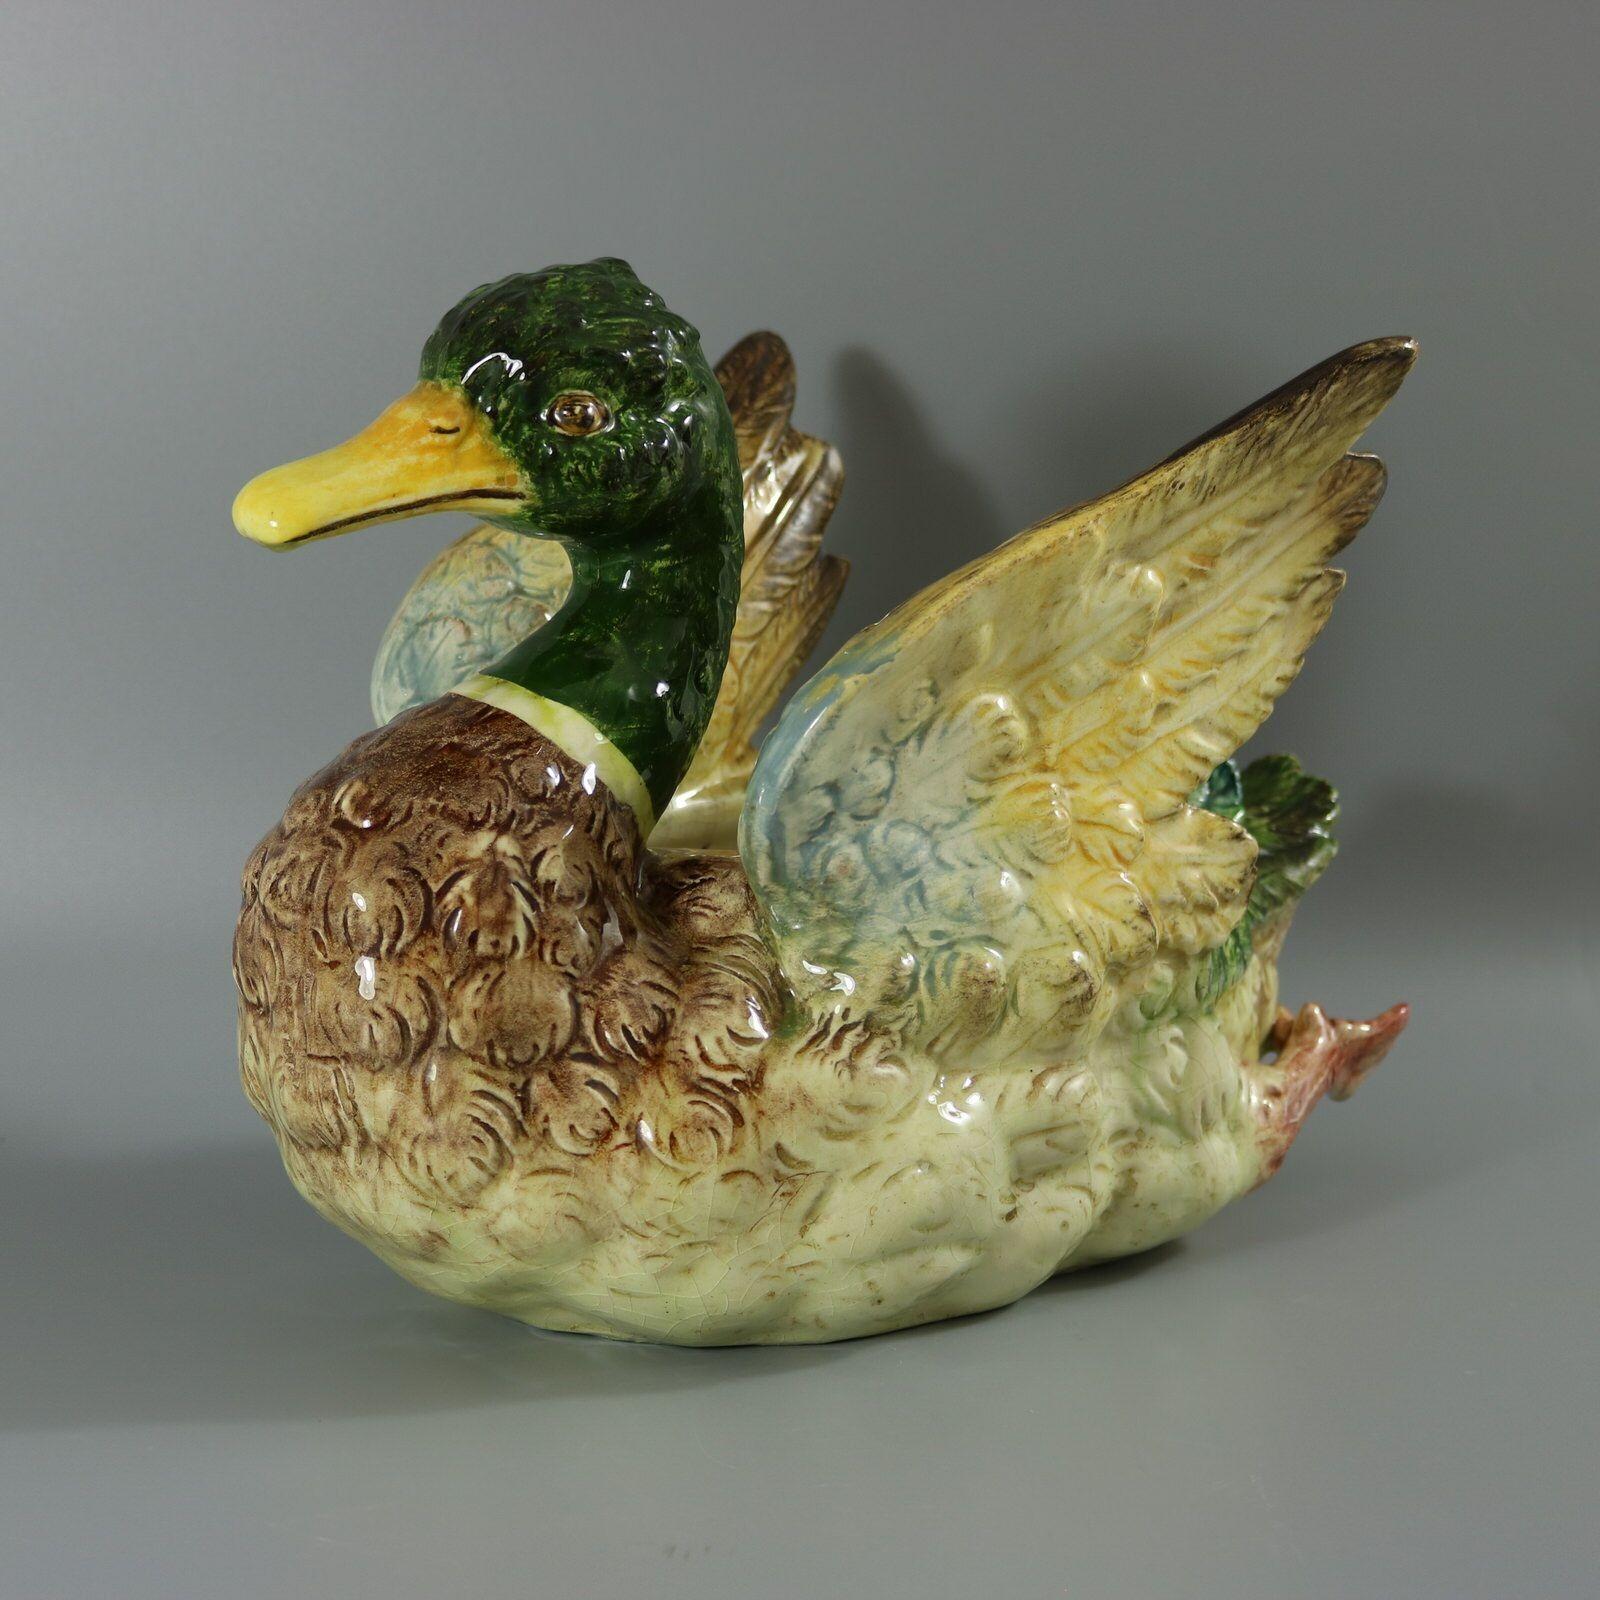 Jerome Massier French Majolica jardinière which features a mallard duck, in swimming position, with wings outstretched. Colouration: cream, green, brown, are predominant. The piece bears maker's marks for the Jerome Massier pottery. Book reference